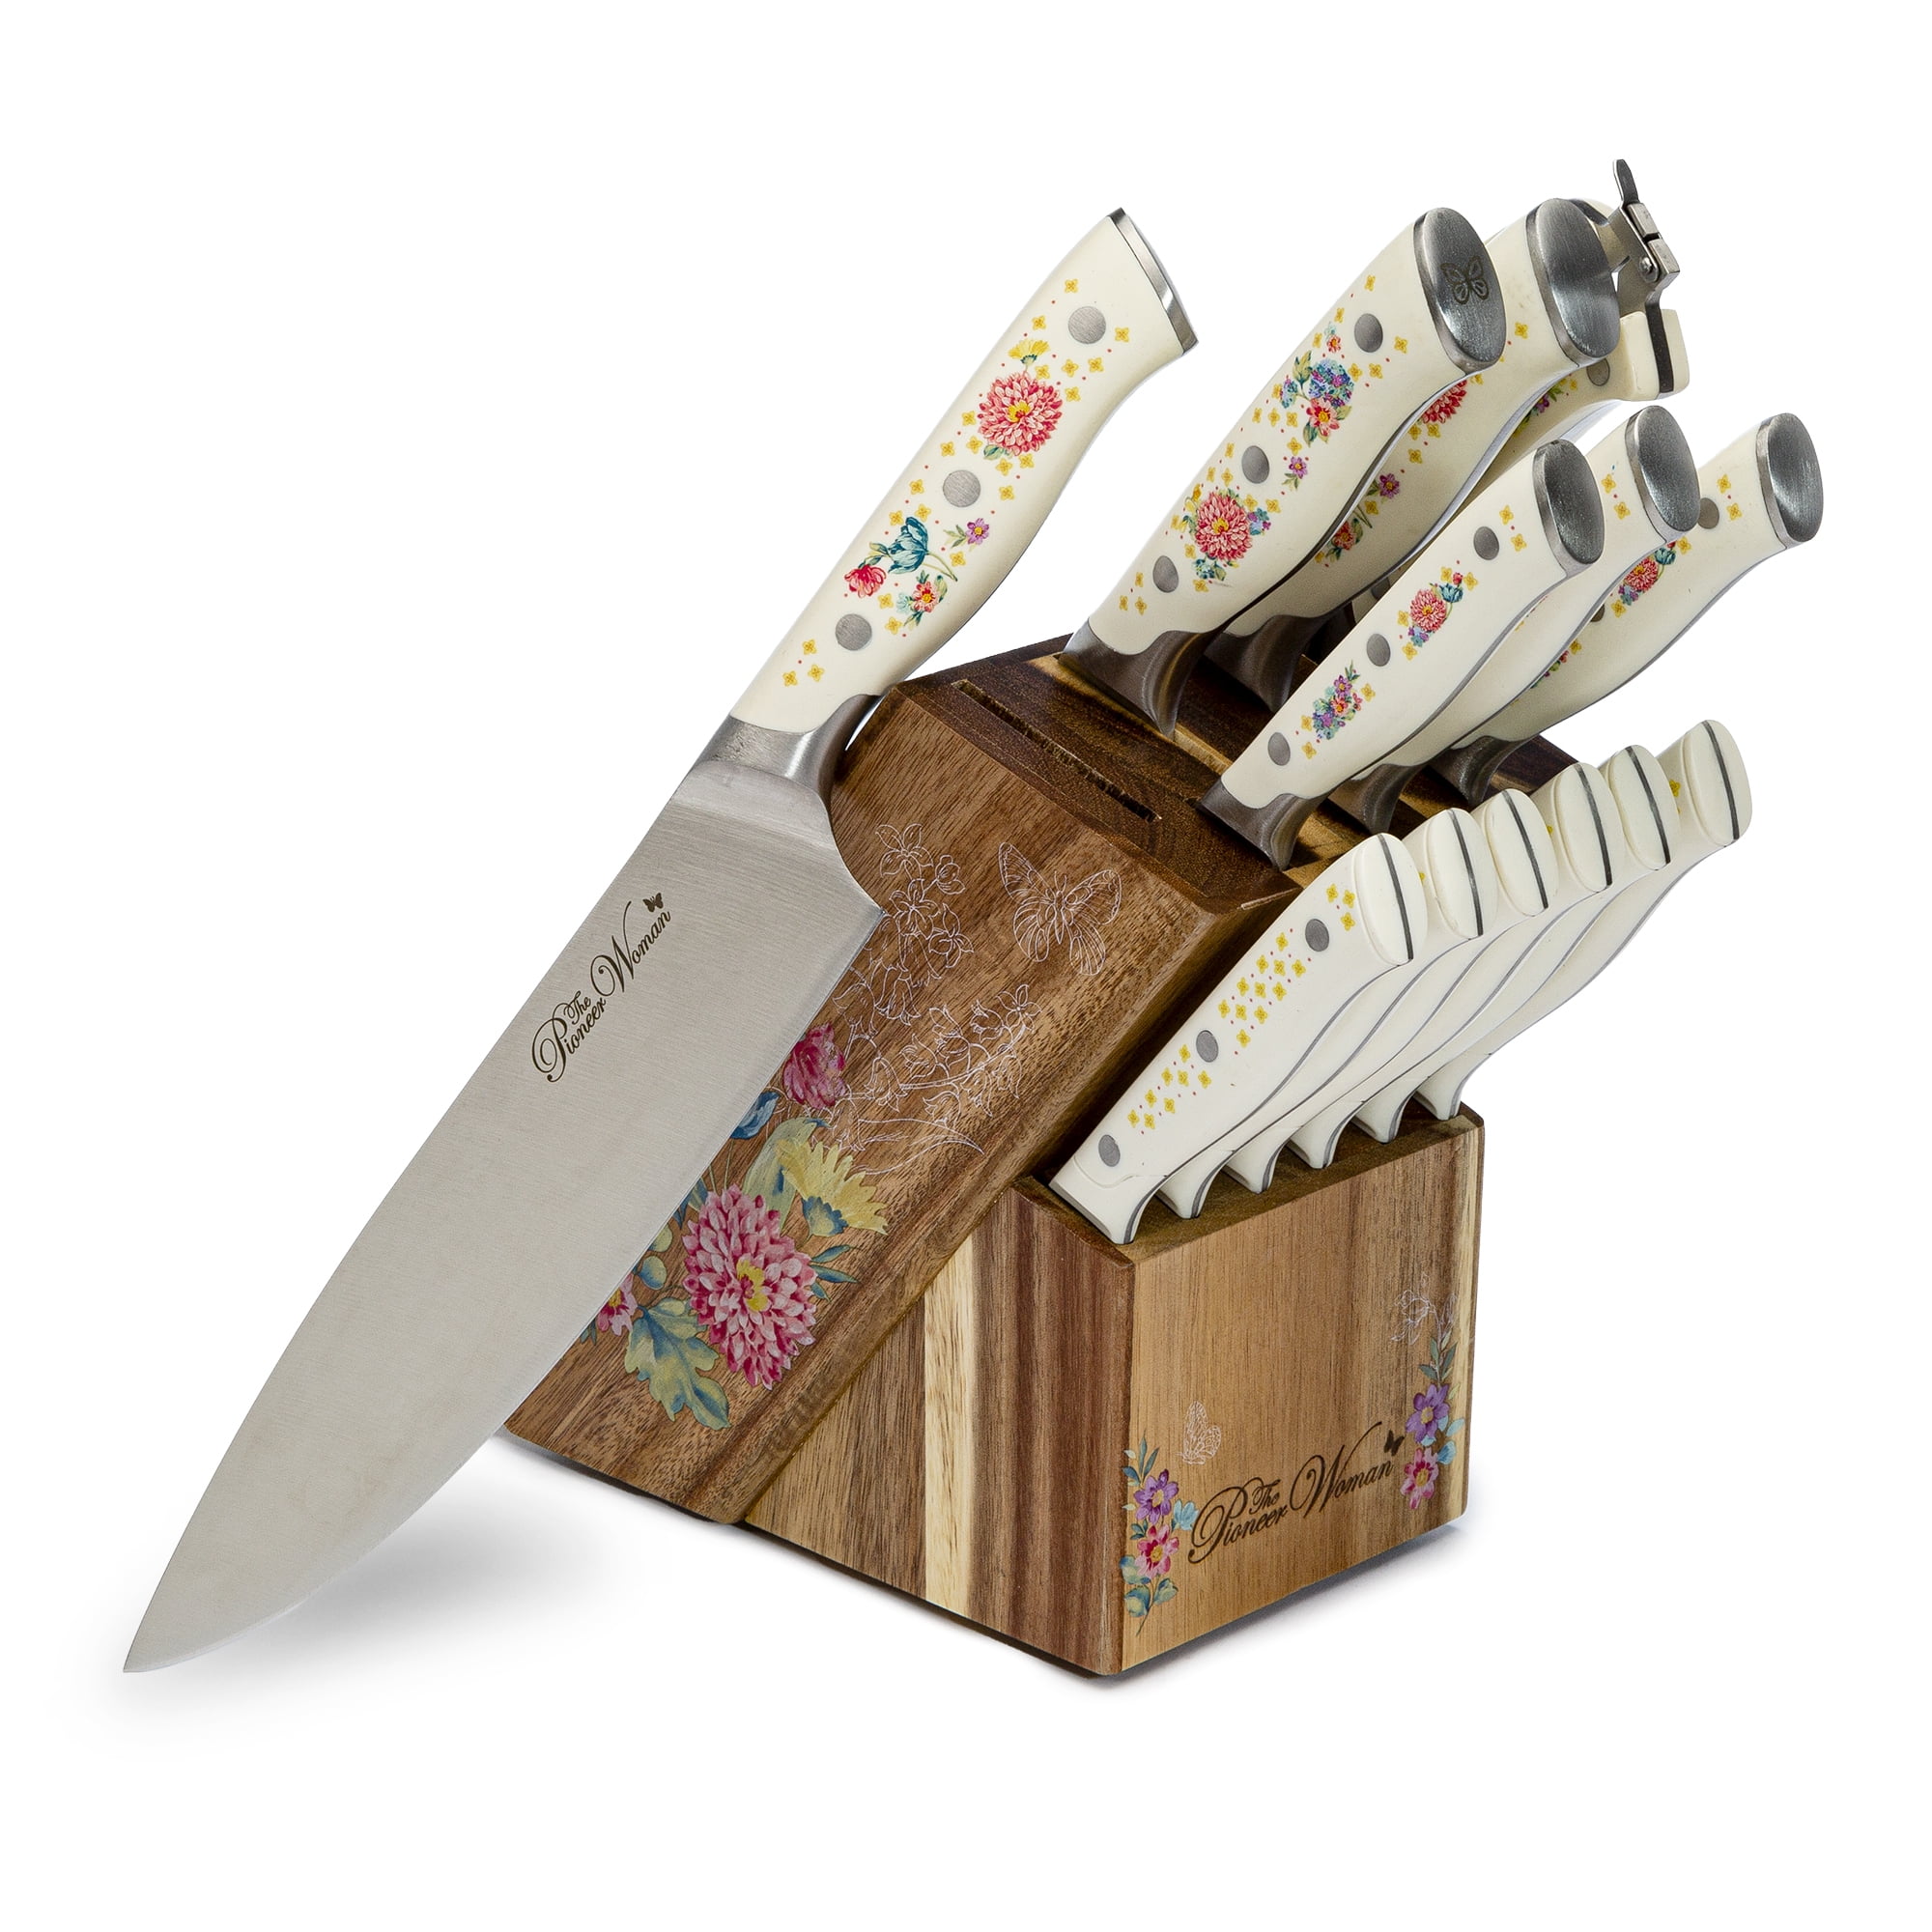 The Pioneer Woman Evie 4-Piece Utility Knife Set